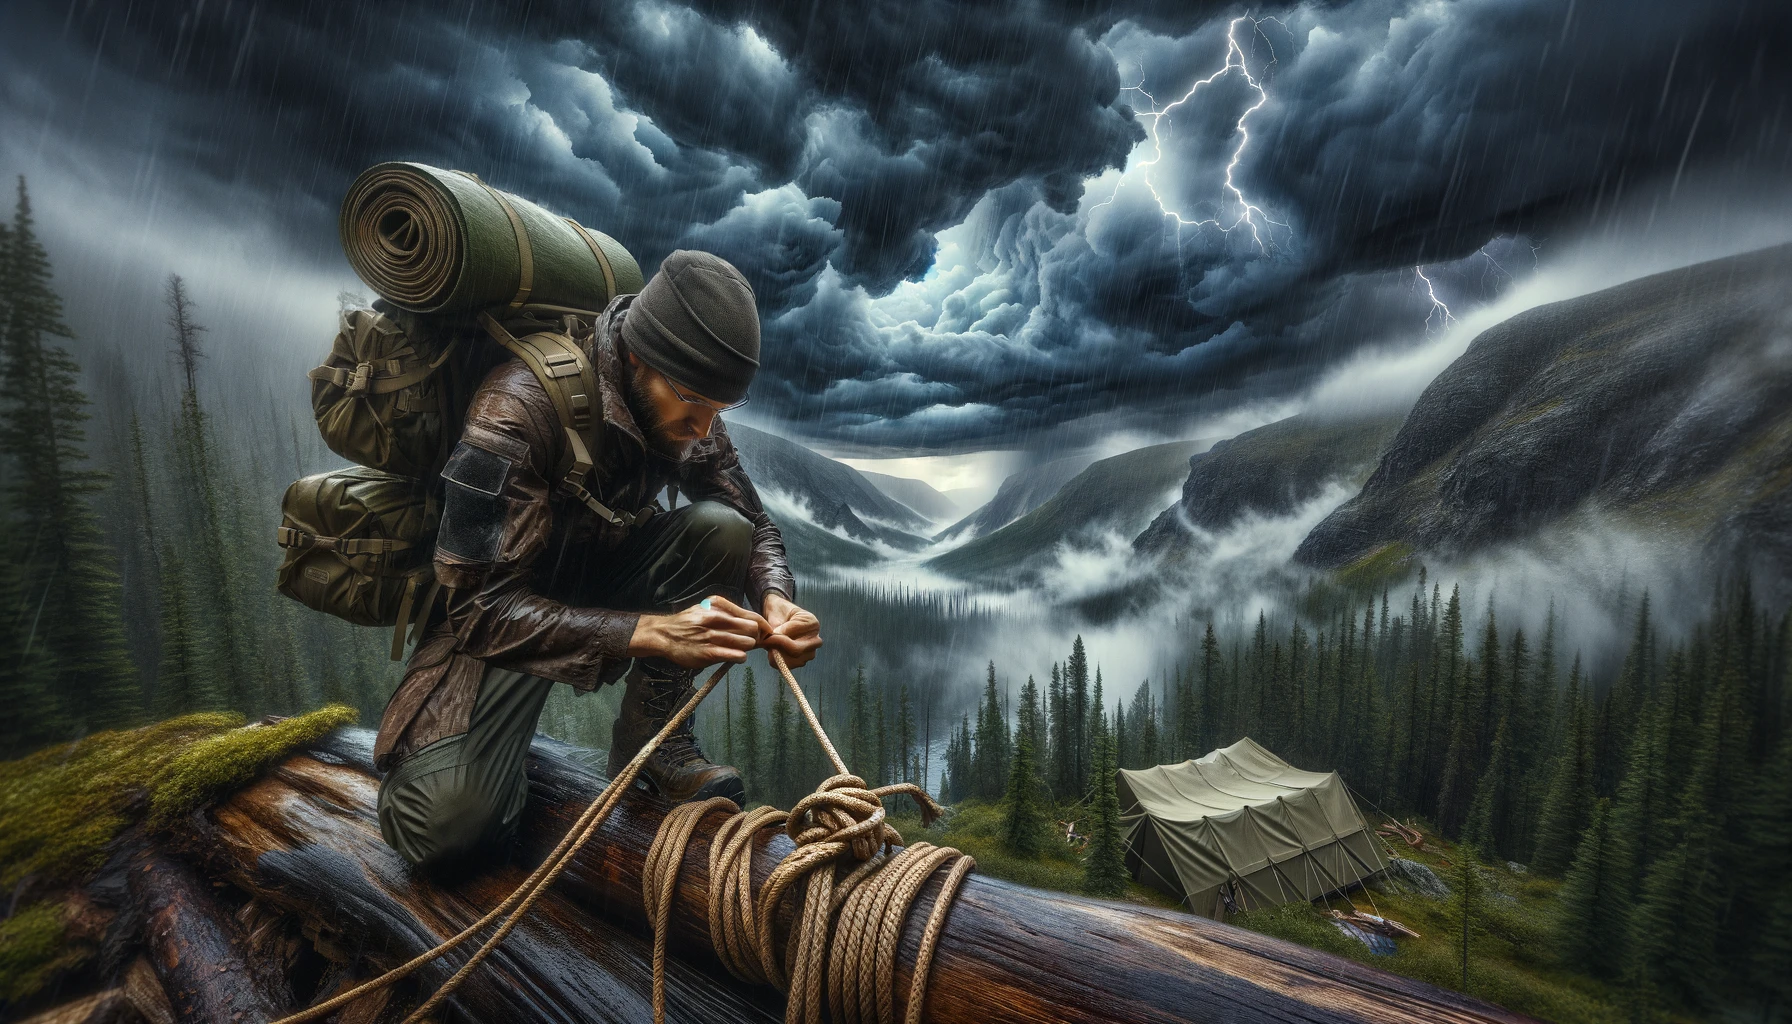 Prepper securing tarp with bowline knot in stormy mountainous wilderness, showcasing survival skills during a thunderstorm, highlighting knot's importance in survival gear preparation